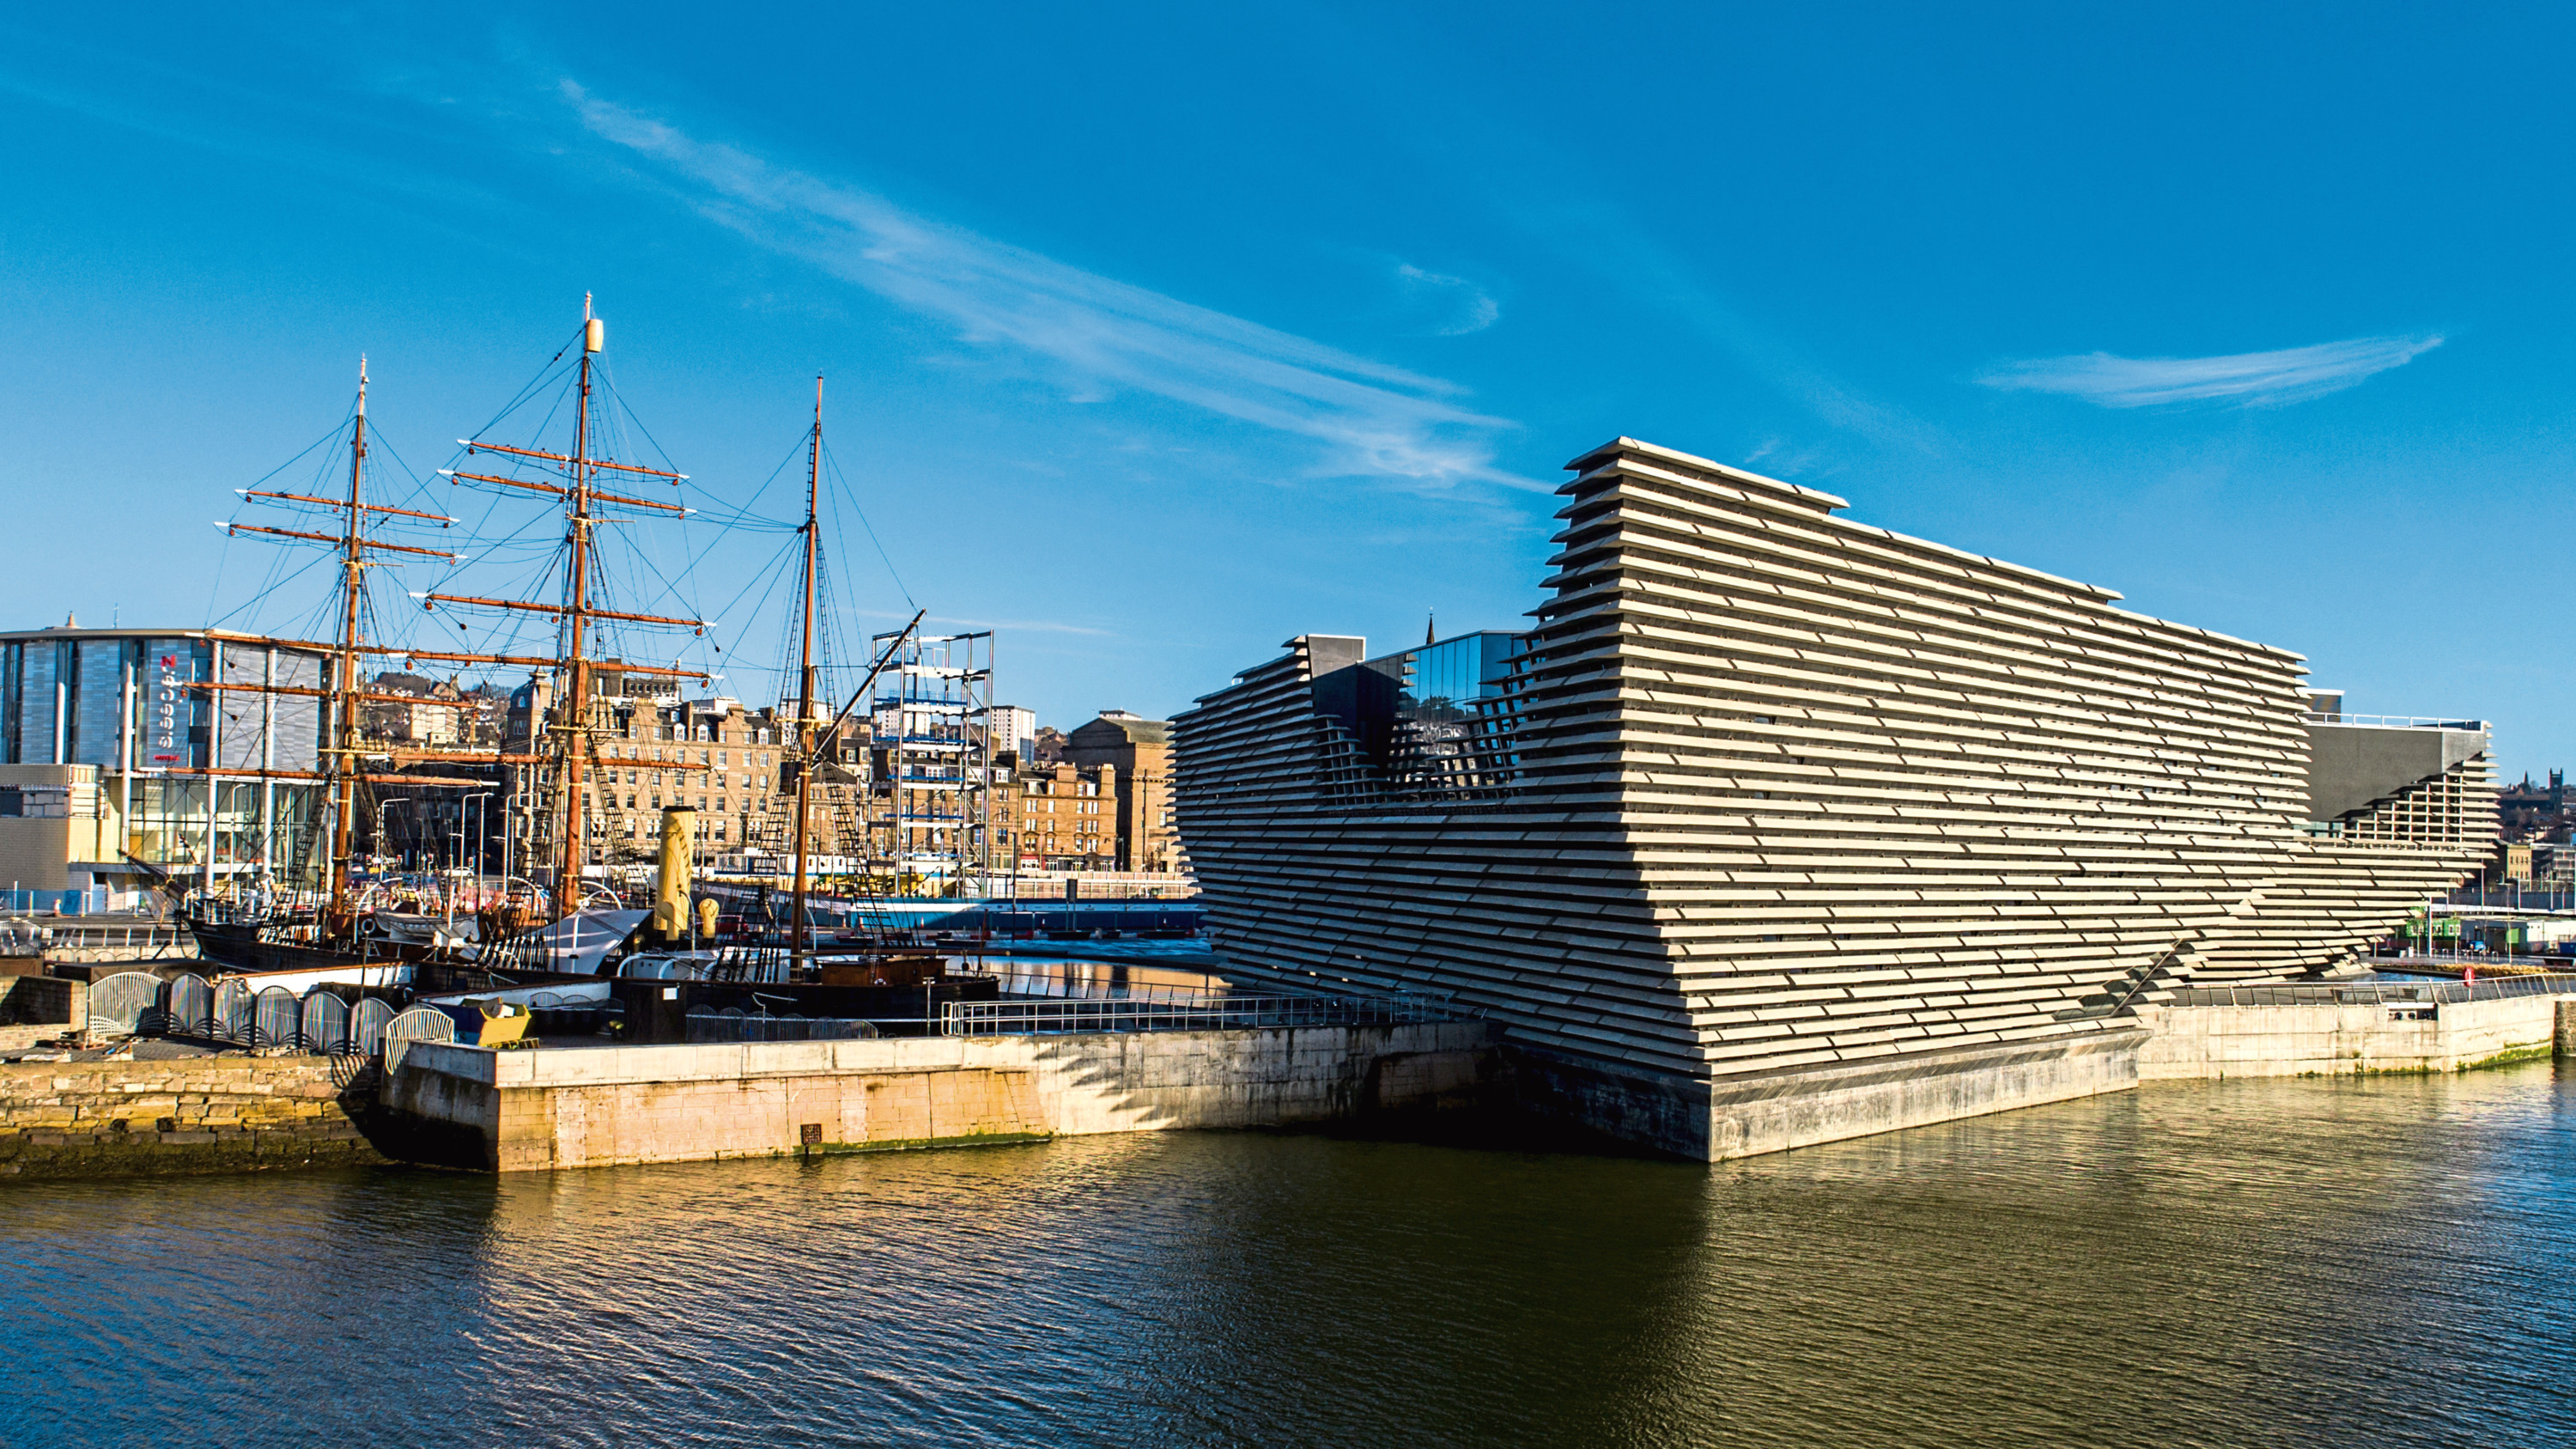 The V&A is benefiting other tourist attractions in Dundee.